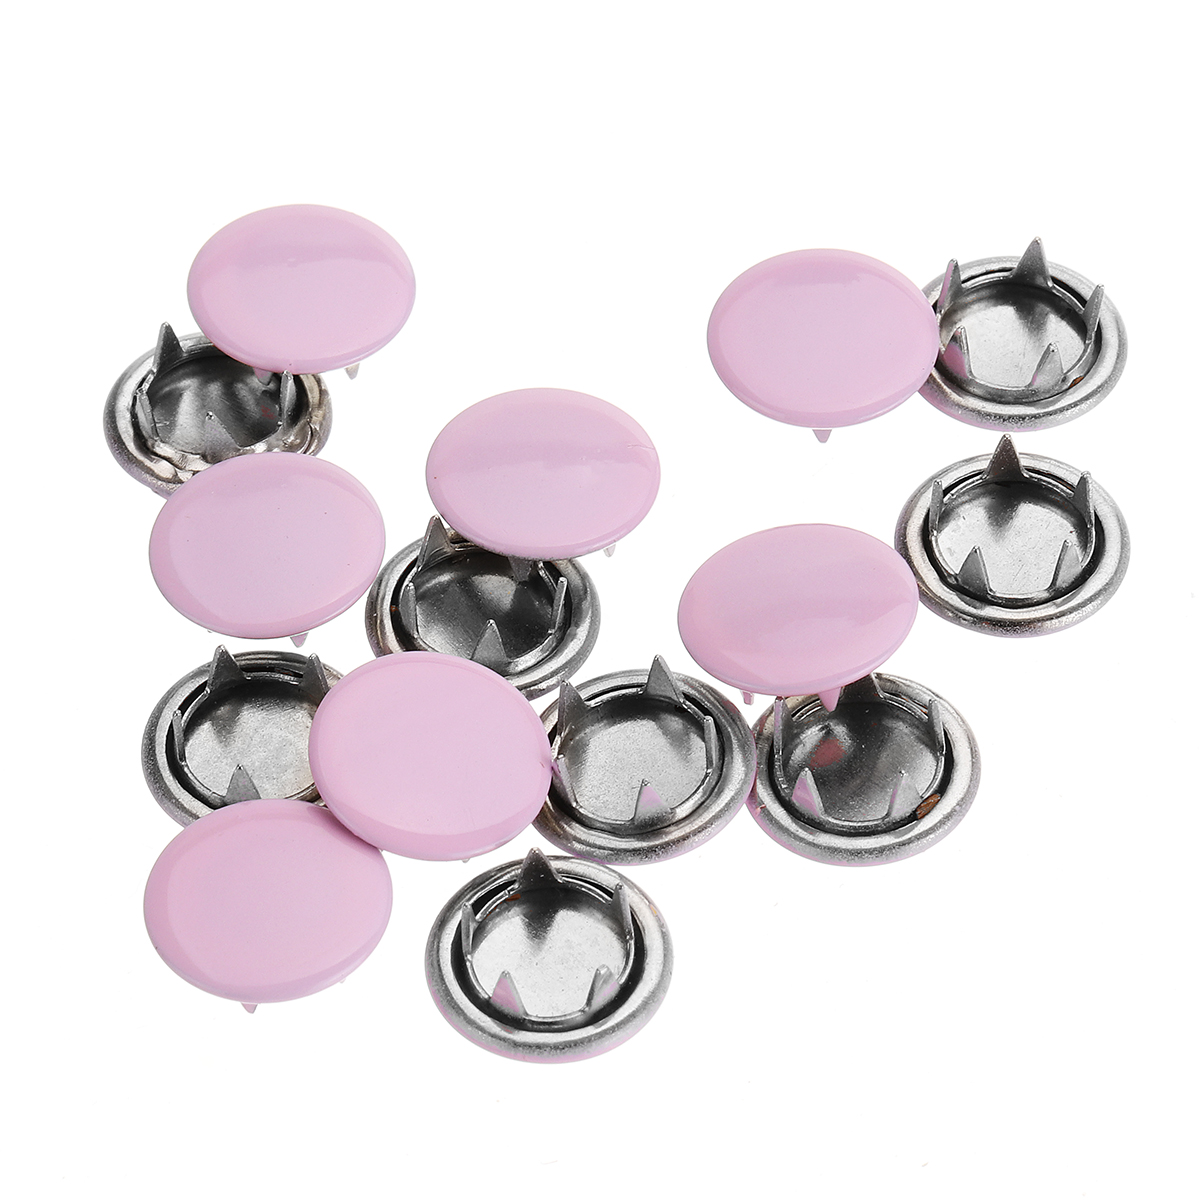 150-Sets-Stainless-Steel-Buttons-Snaps-Fasteners-Dummy-Clips-Press-Studs-10-Colors-1451584-2